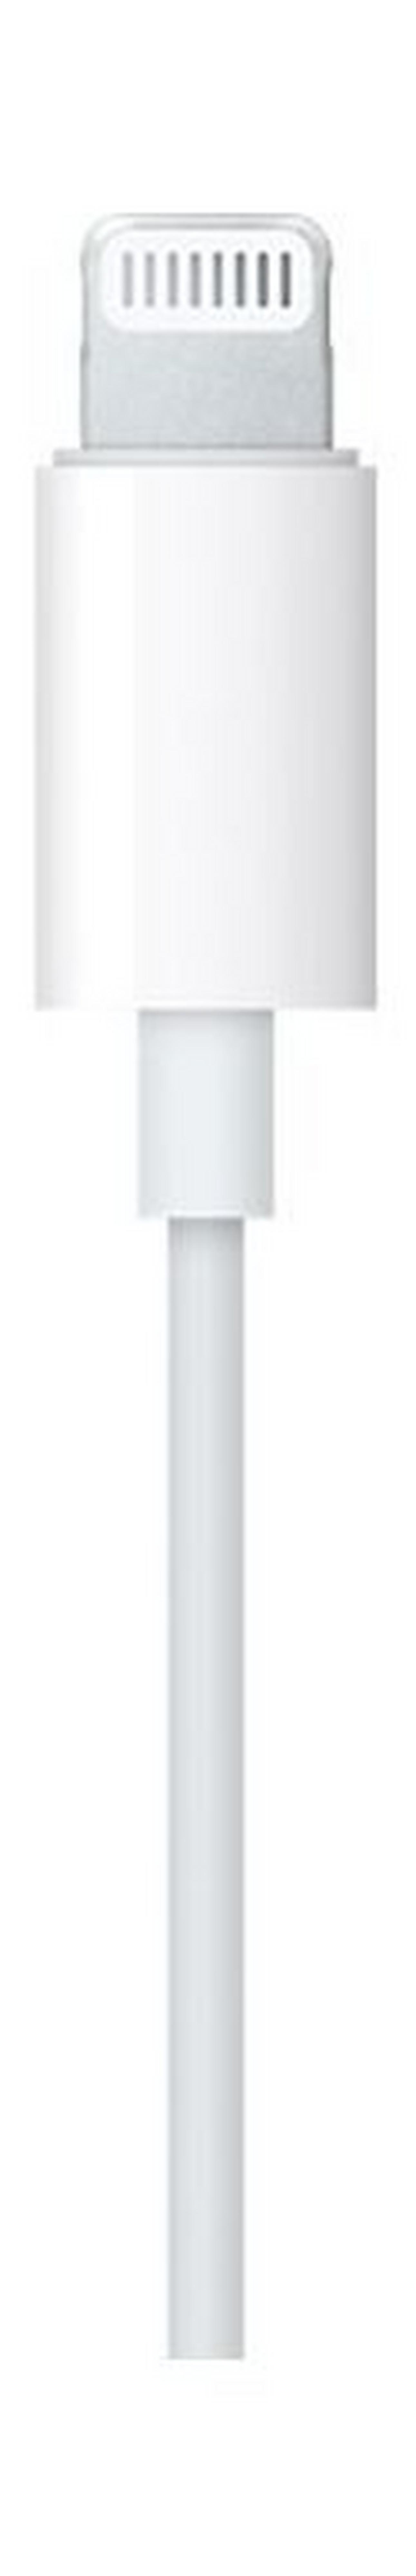 Apple EarPods with Lightning Connector MMTN2ZM/A - White